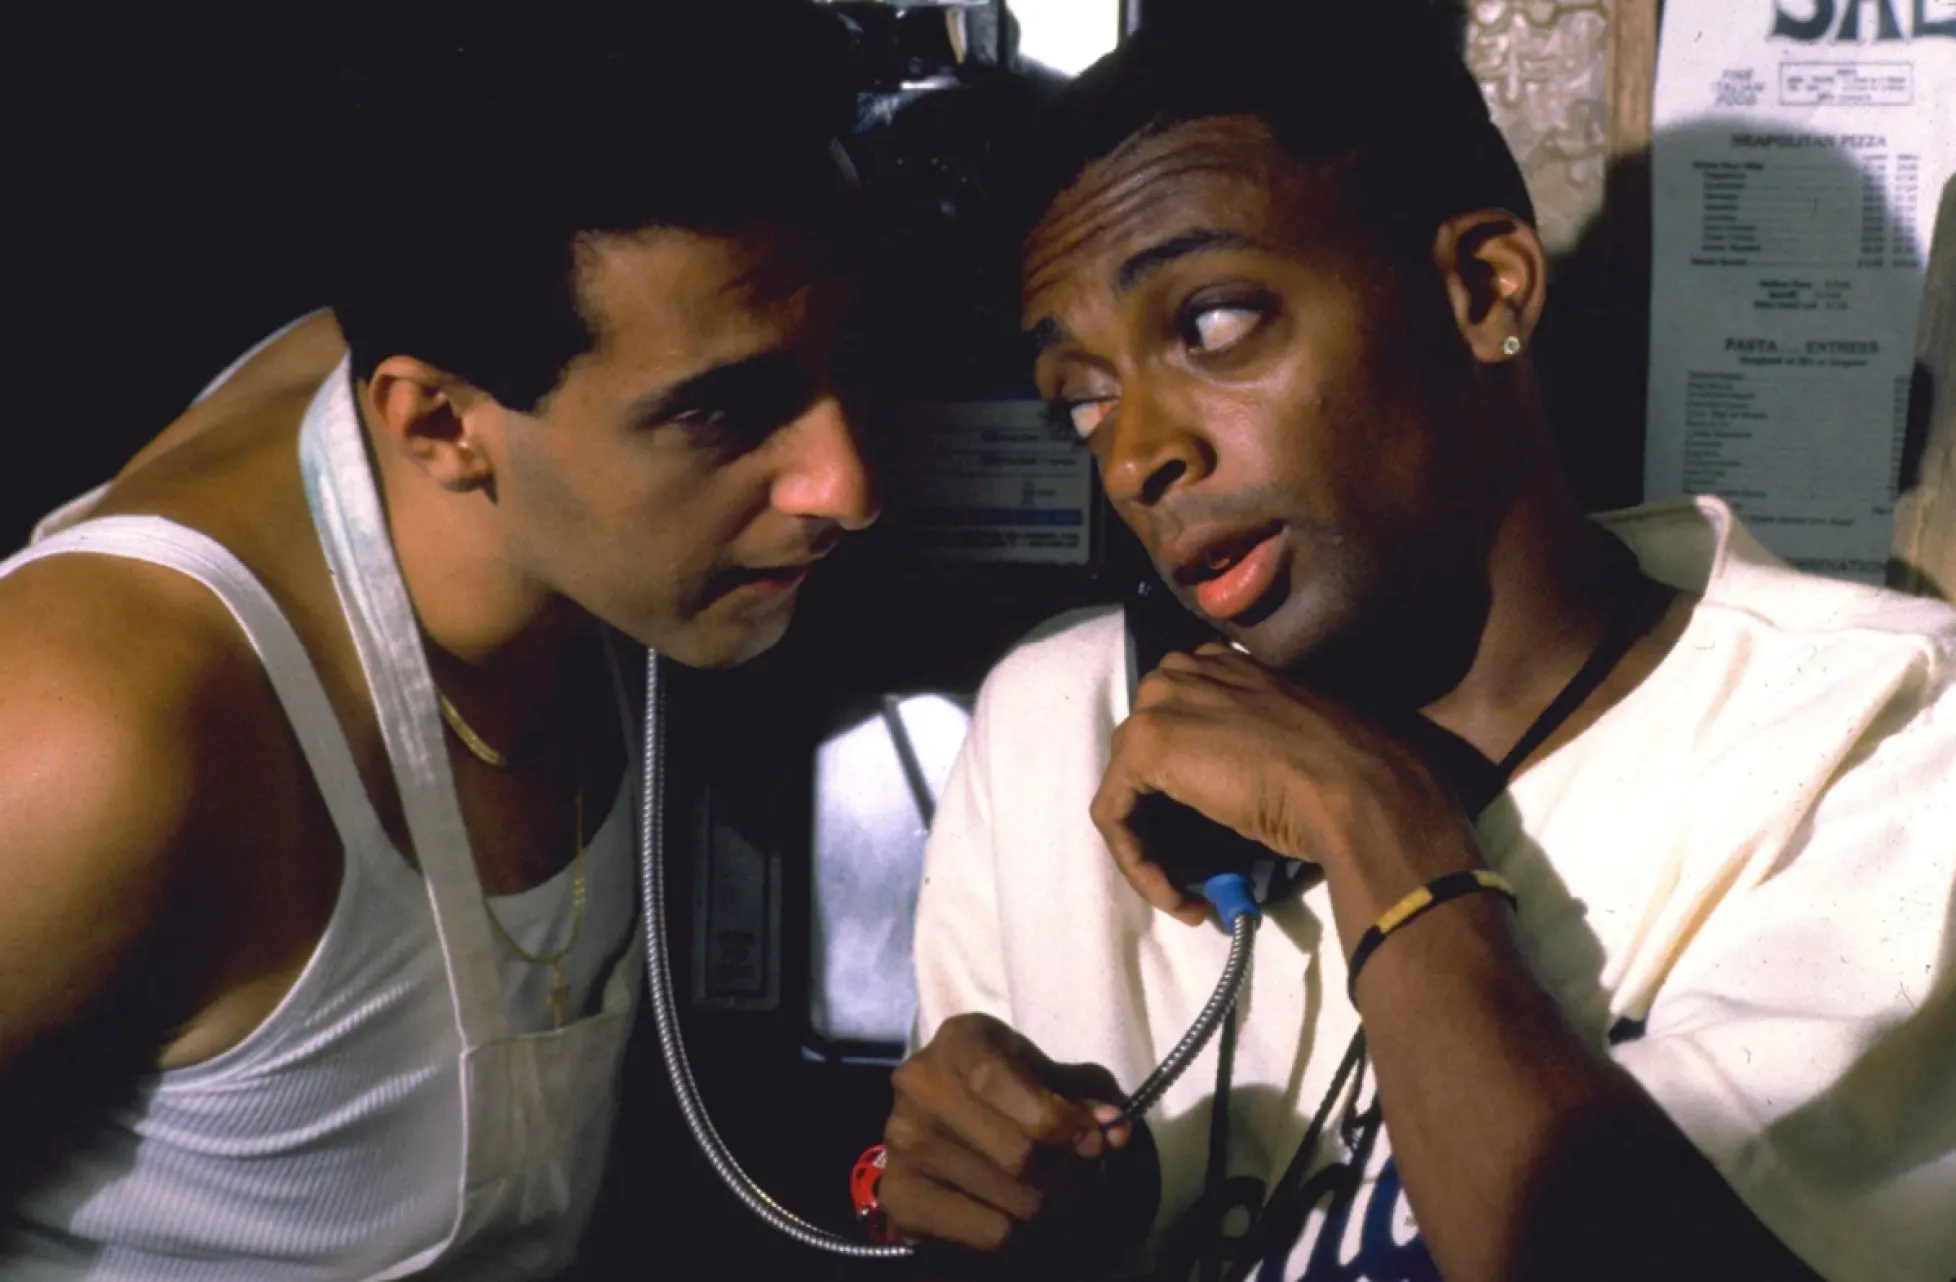 Pino (John Turturro) and Mookie (Spike Lee) talking in the pizzeria in "Do The Right Thing." 